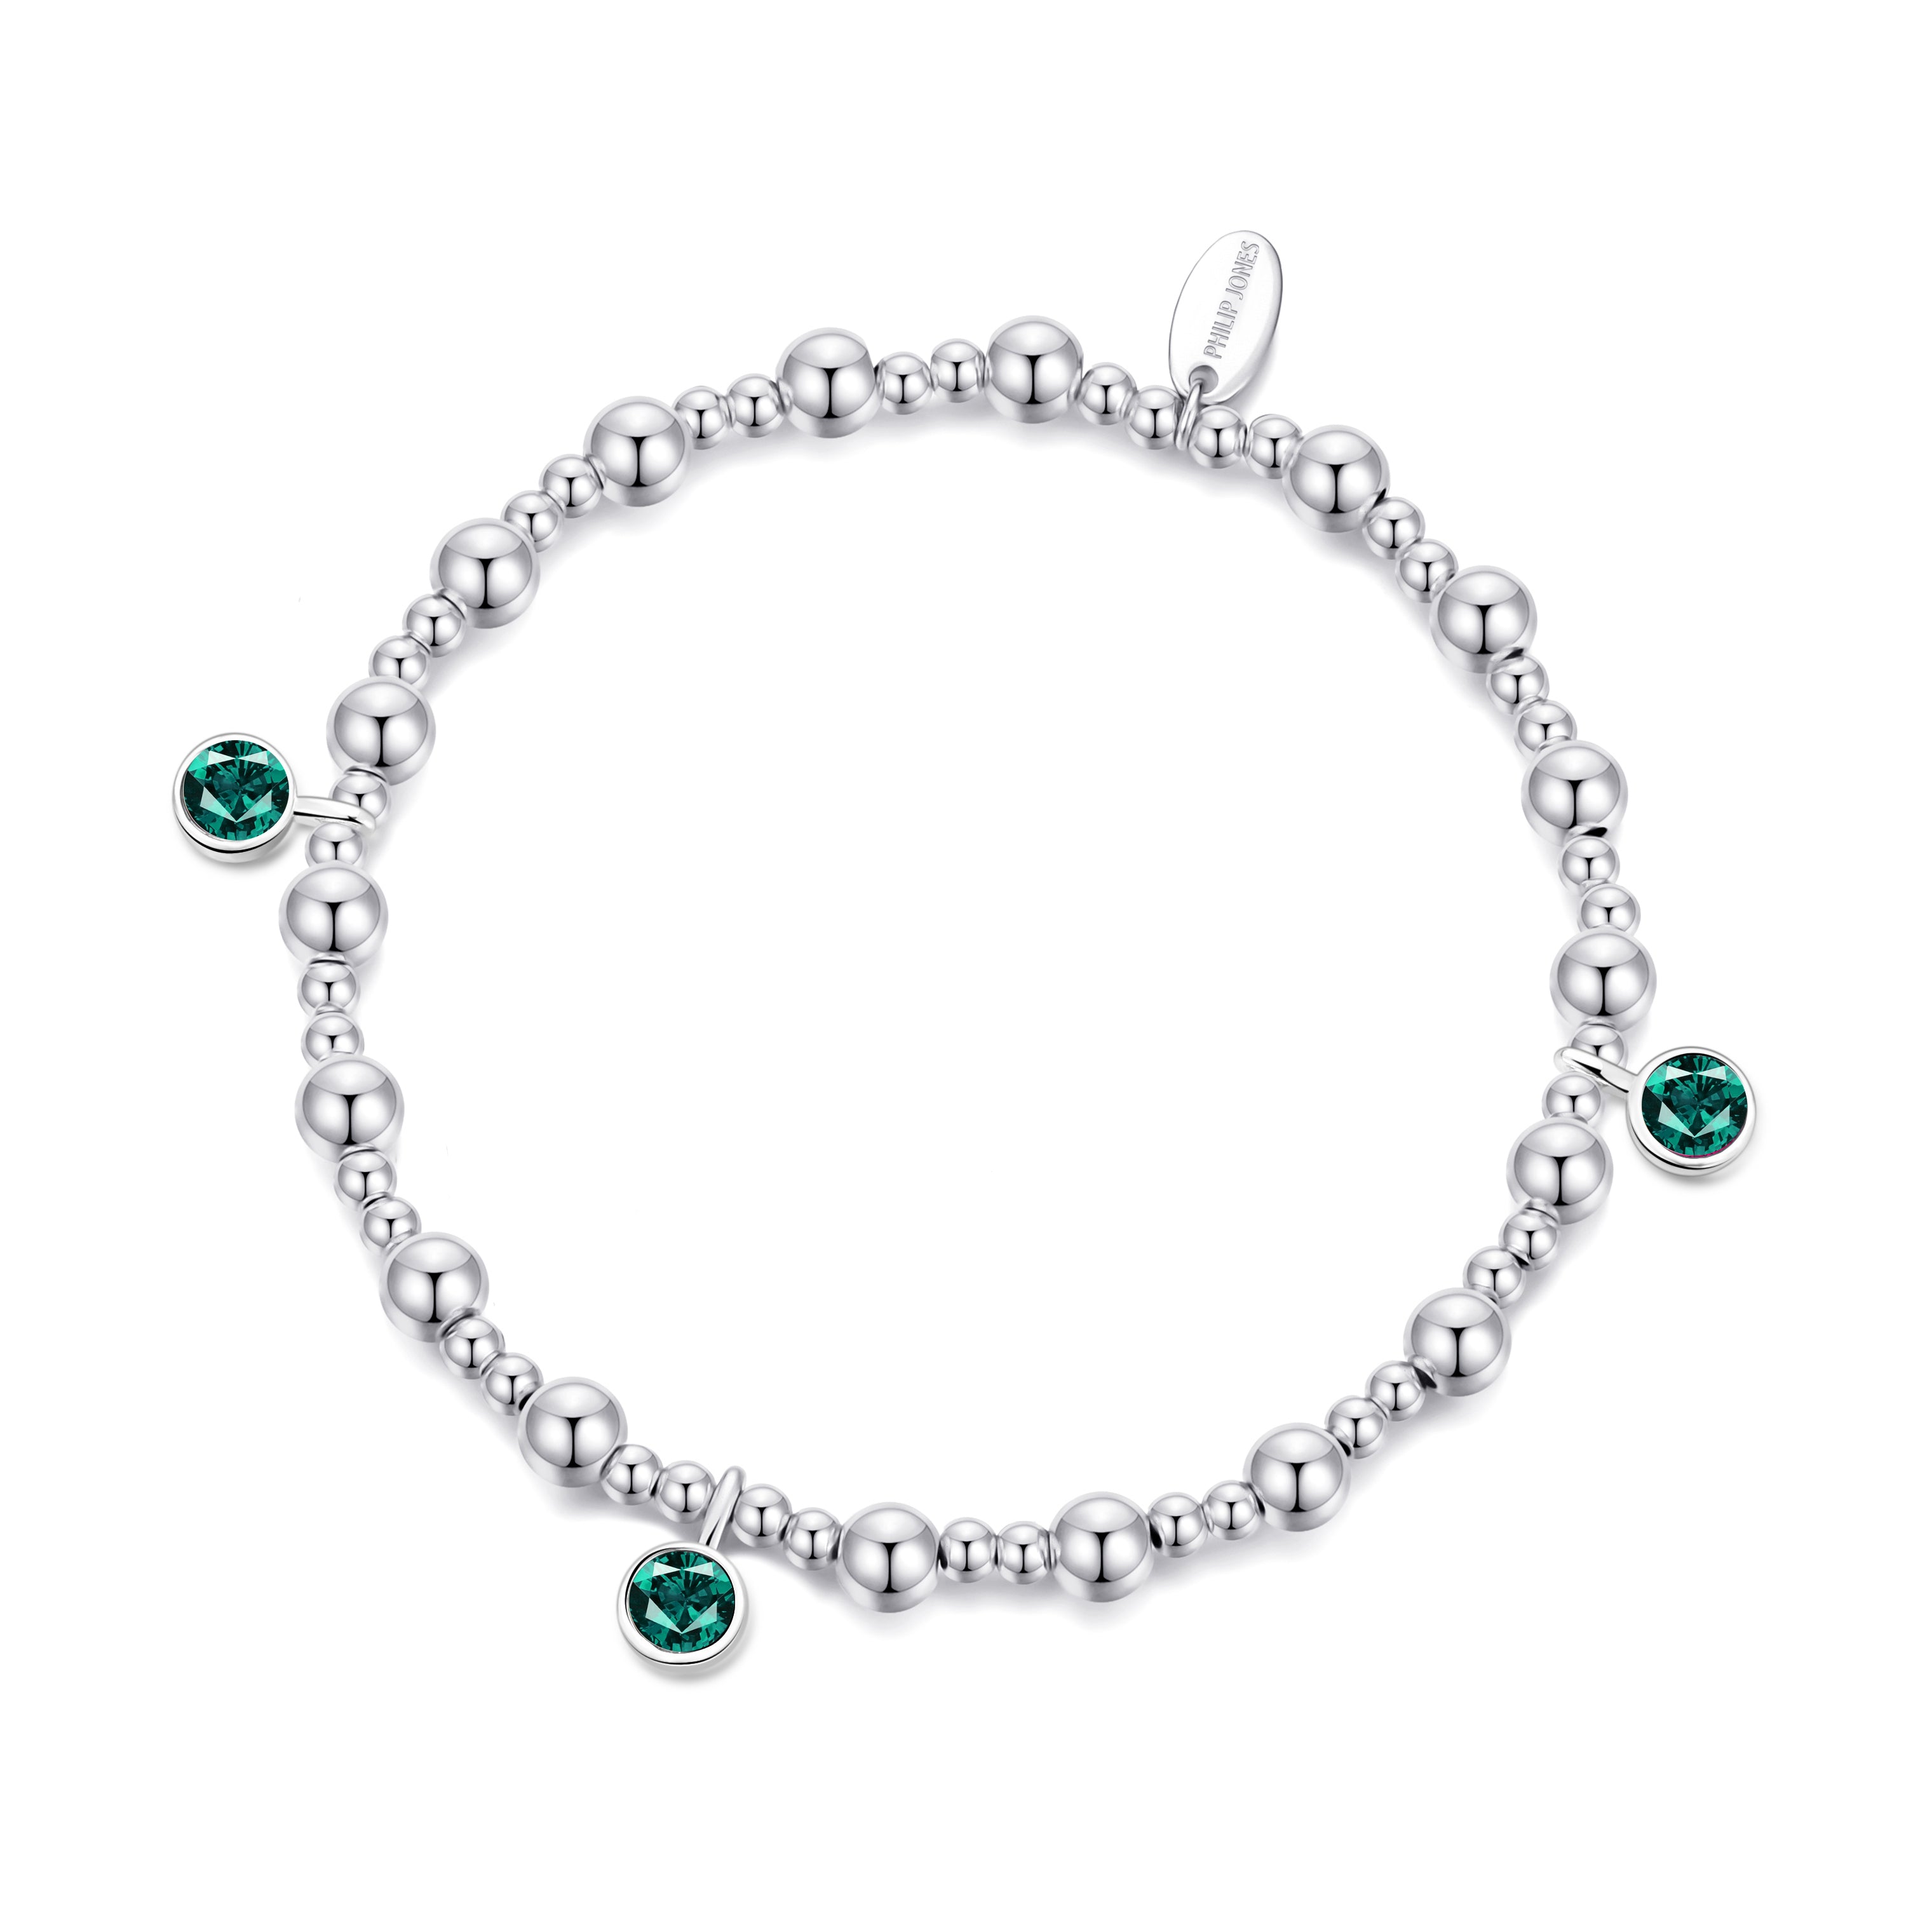 May (Emerald) Birthstone Stretch Charm Bracelet with Quote Gift Box